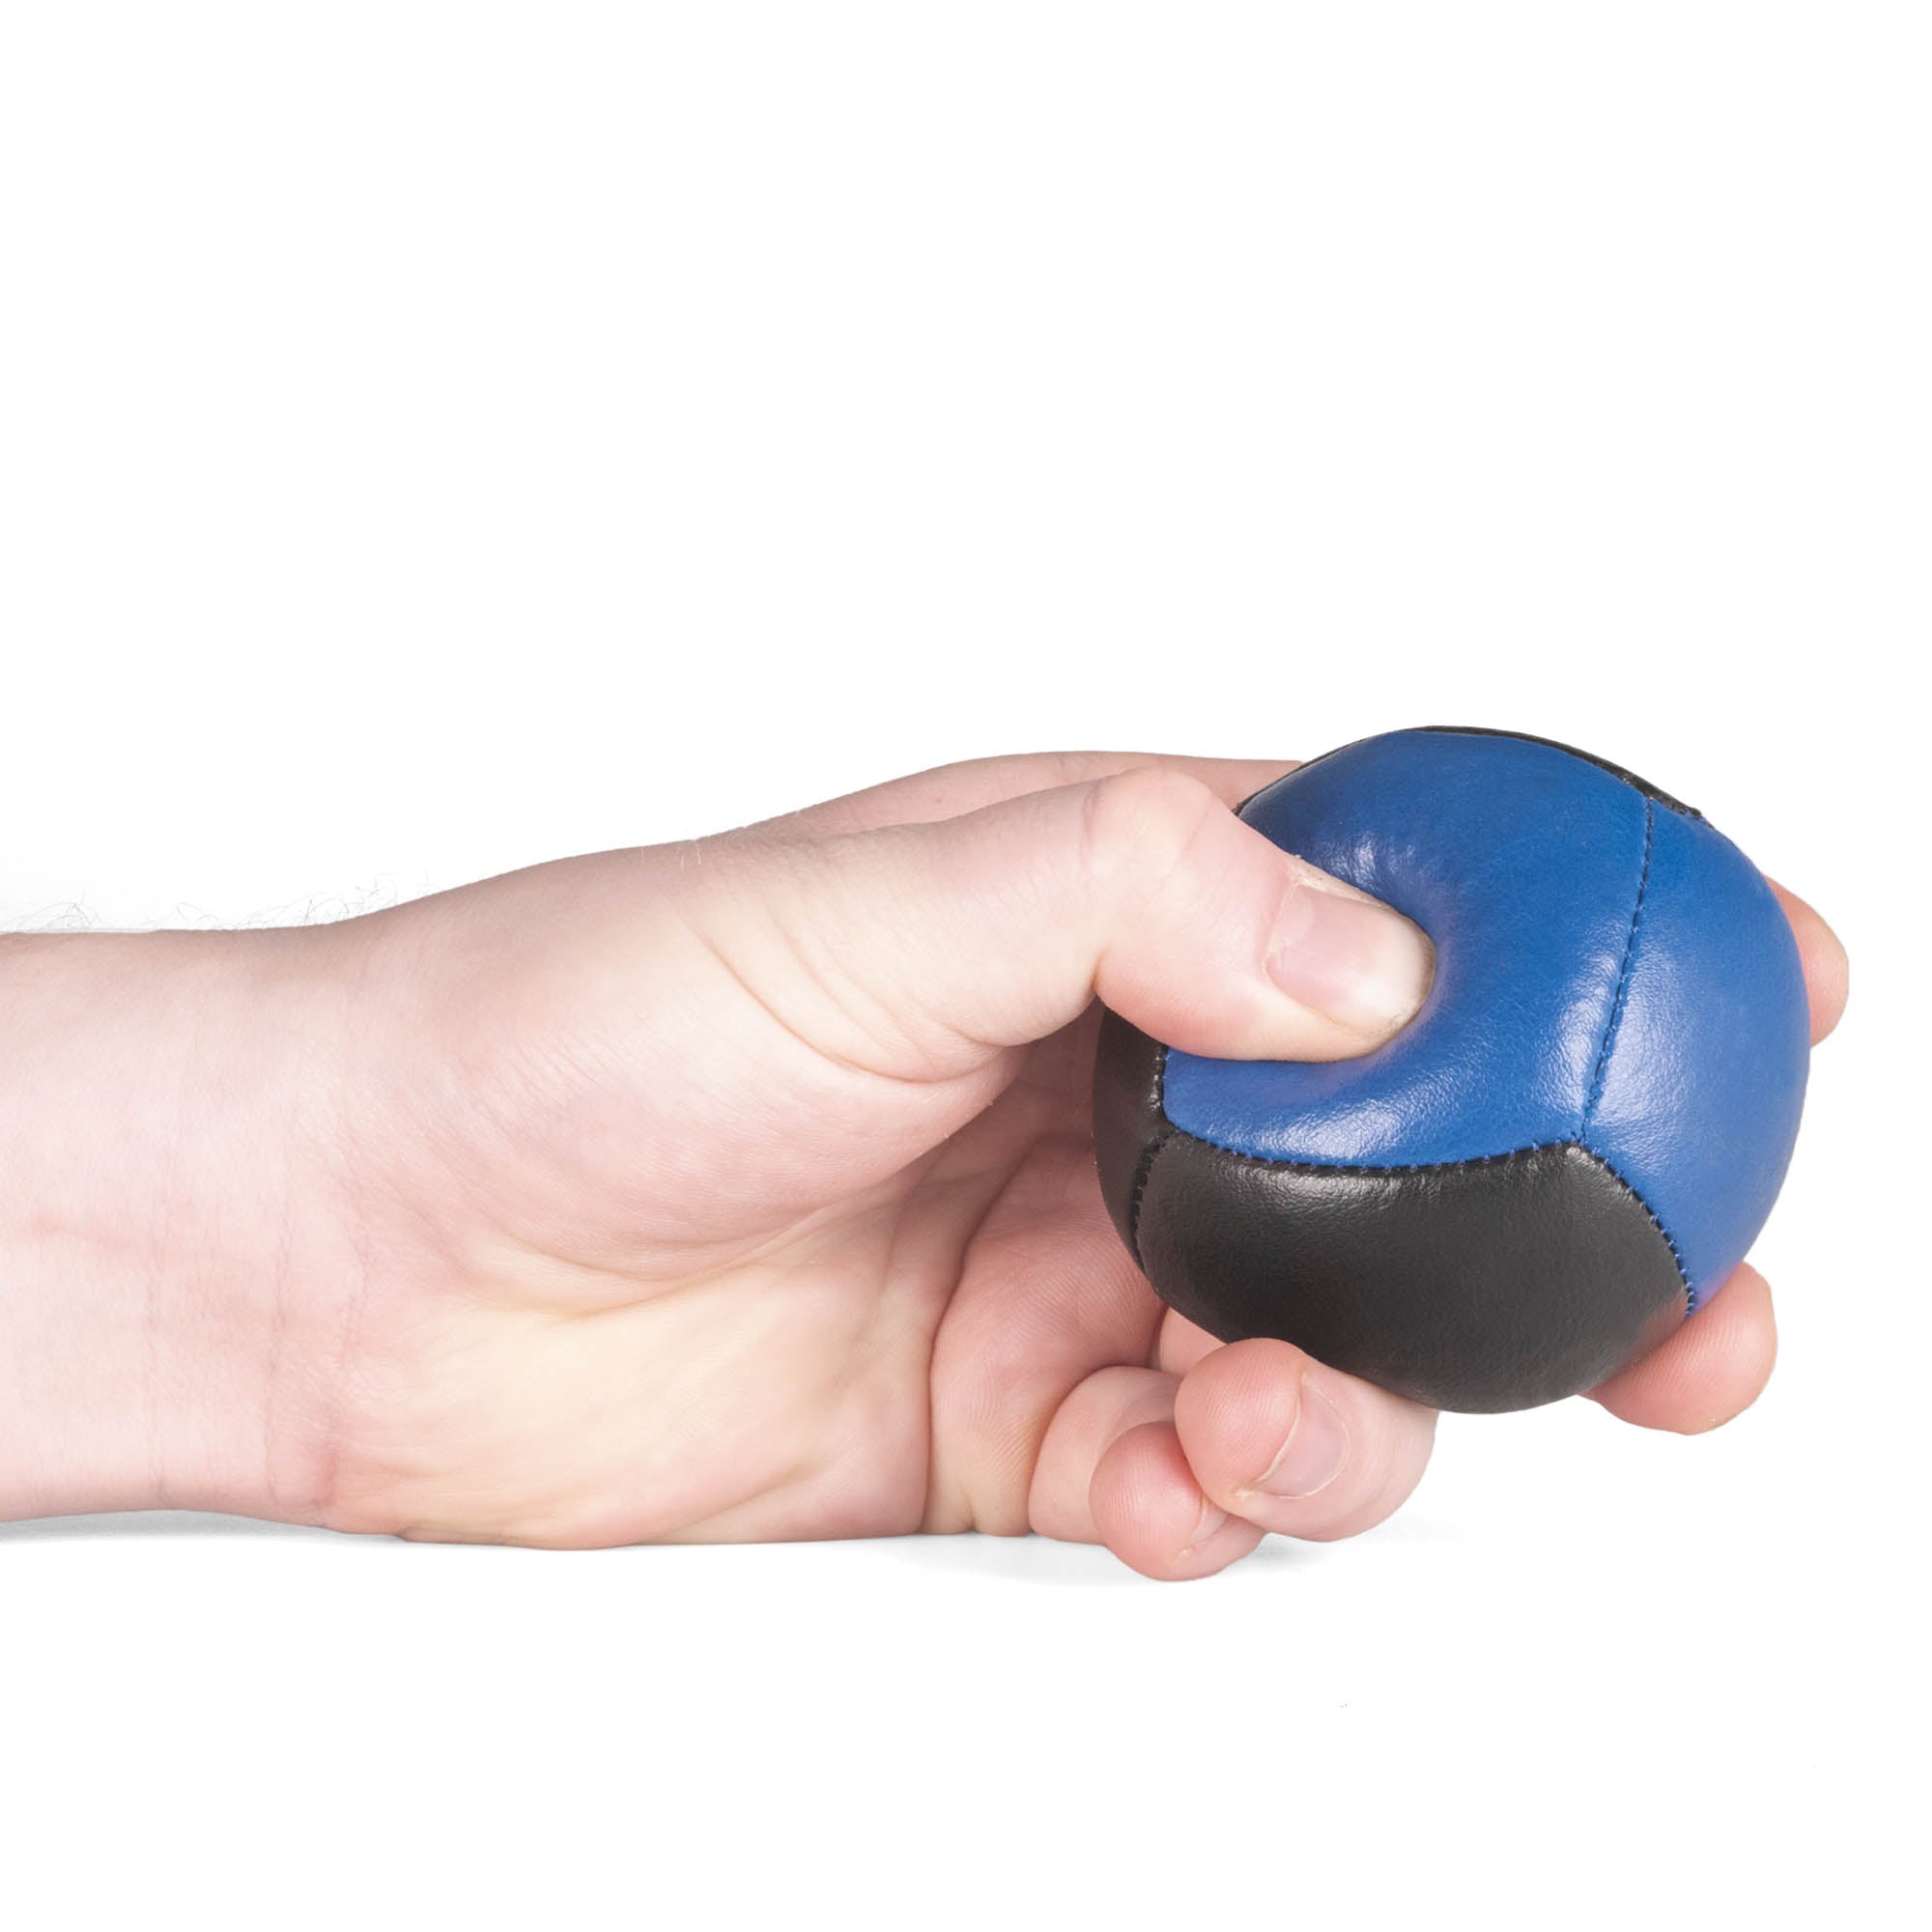 Firetoys blue/black 110g thud juggling ball being squeezed